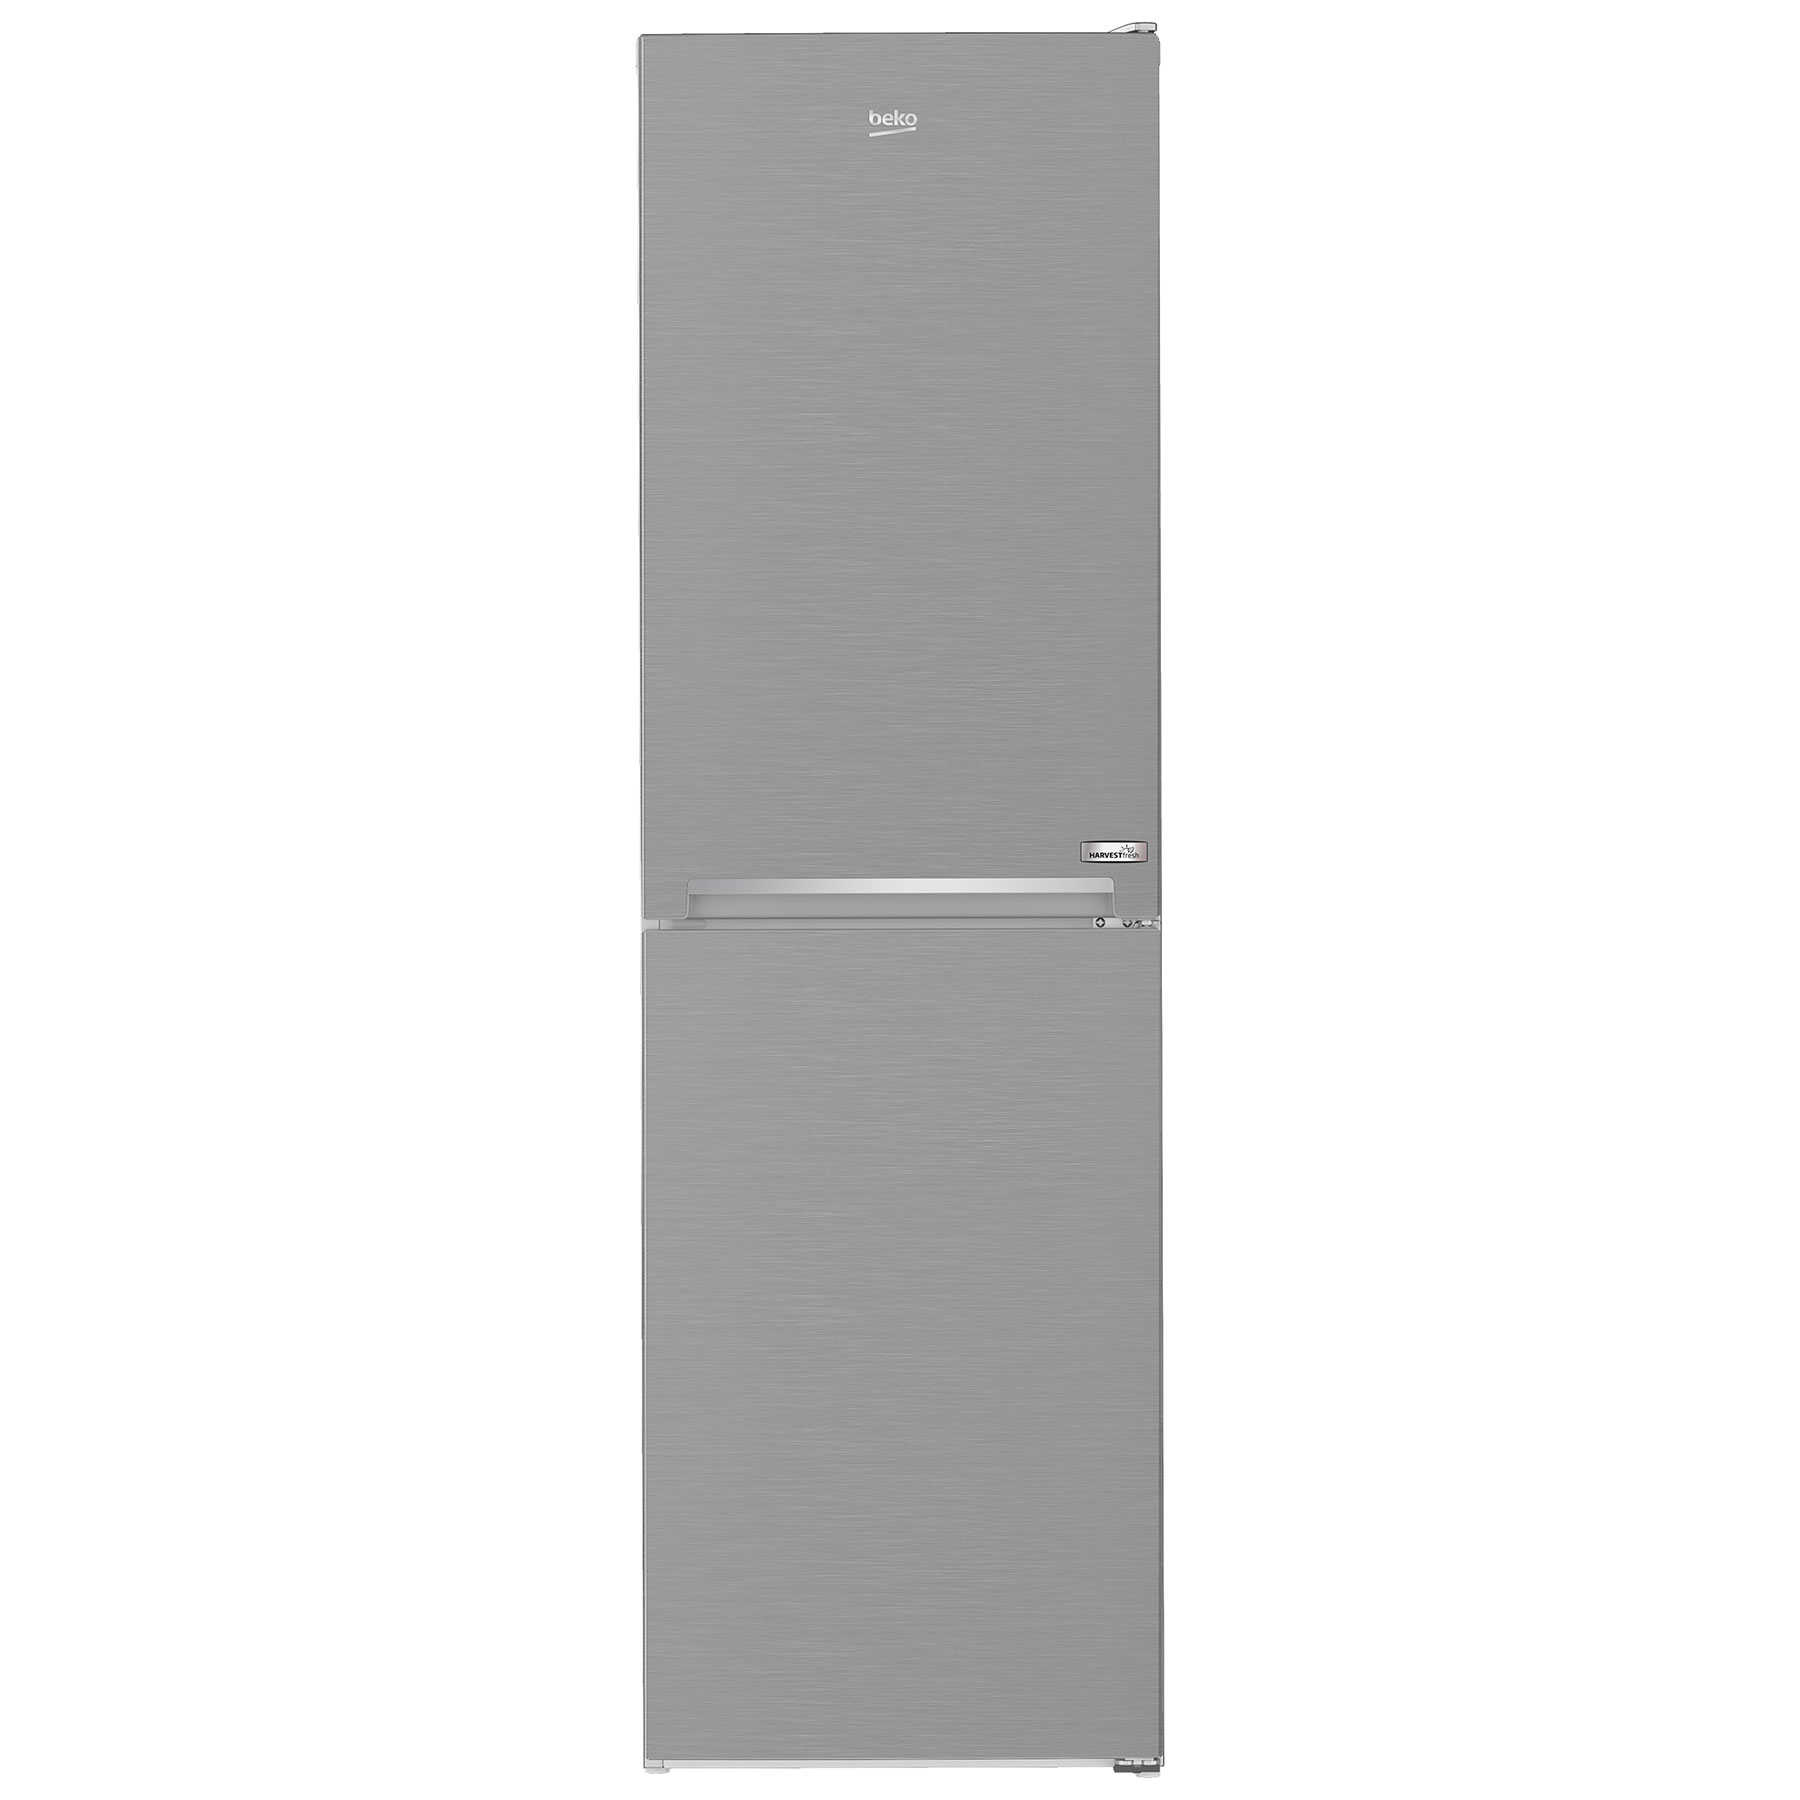 Image of Beko CNG3582VPS 55cm Frost Free Fridge Freezer in St St 1 82m F Rated